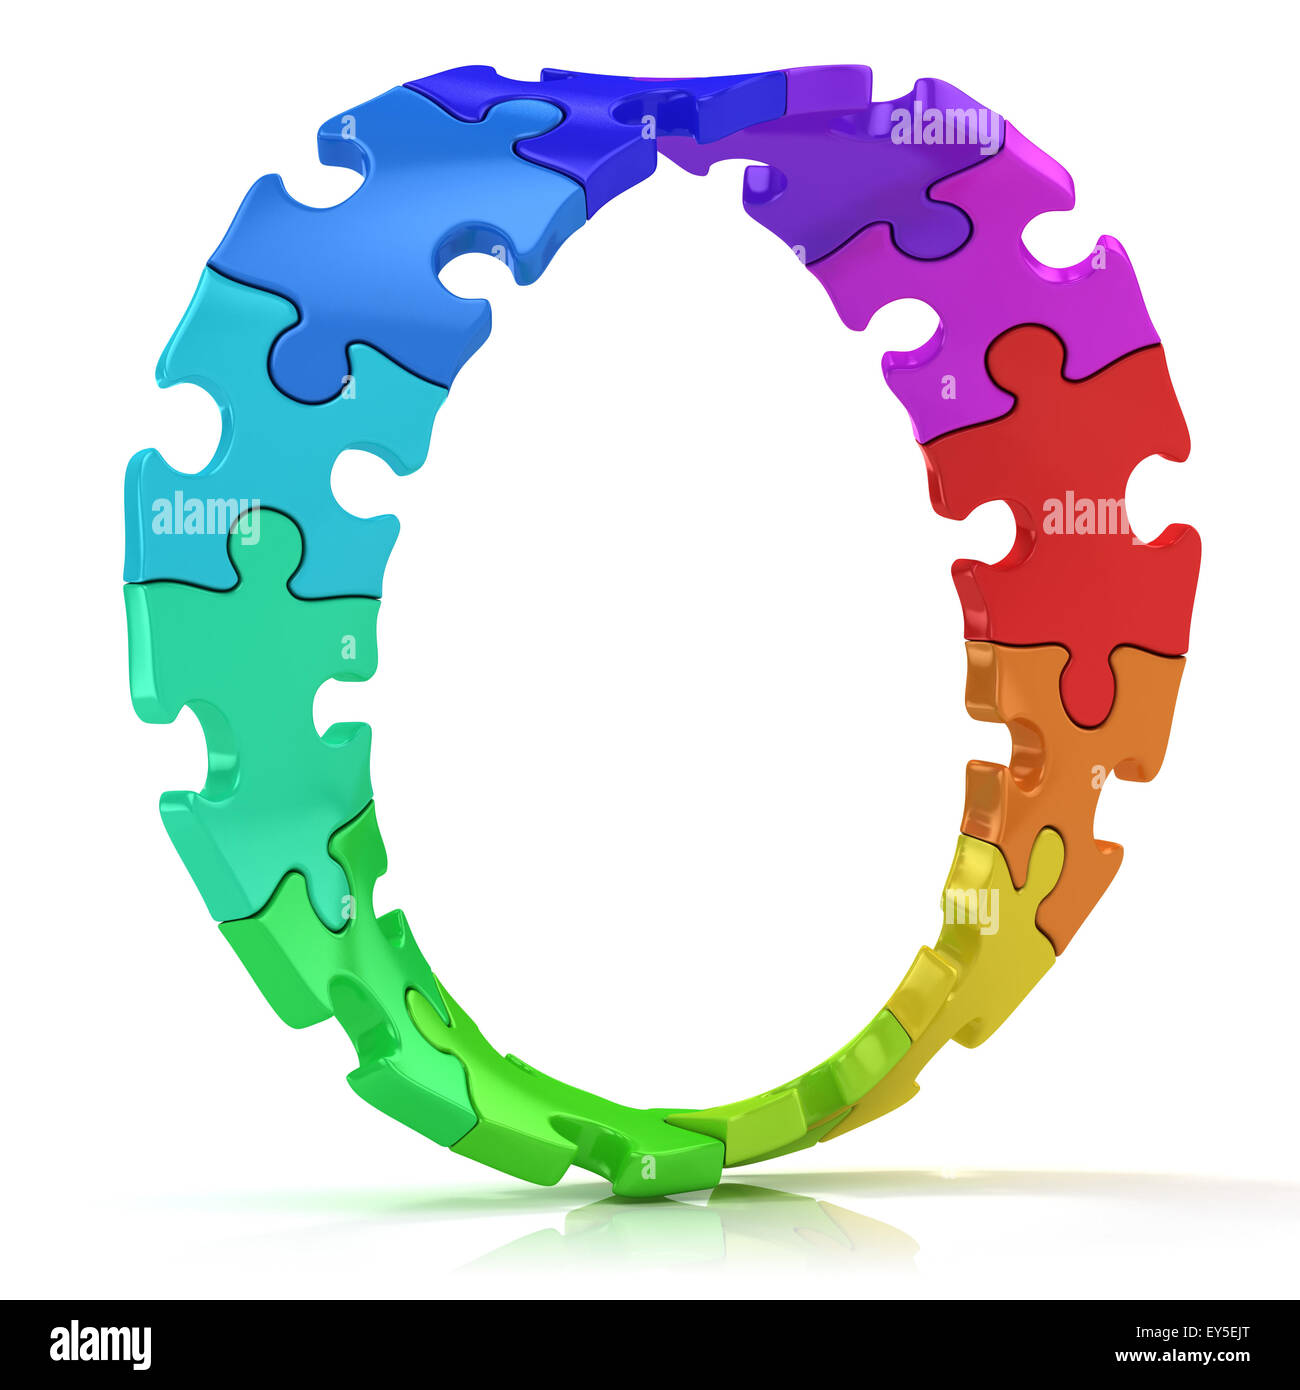 Twisted circle of colorful jigsaw puzzles. Isolated on white background. Stock Photo